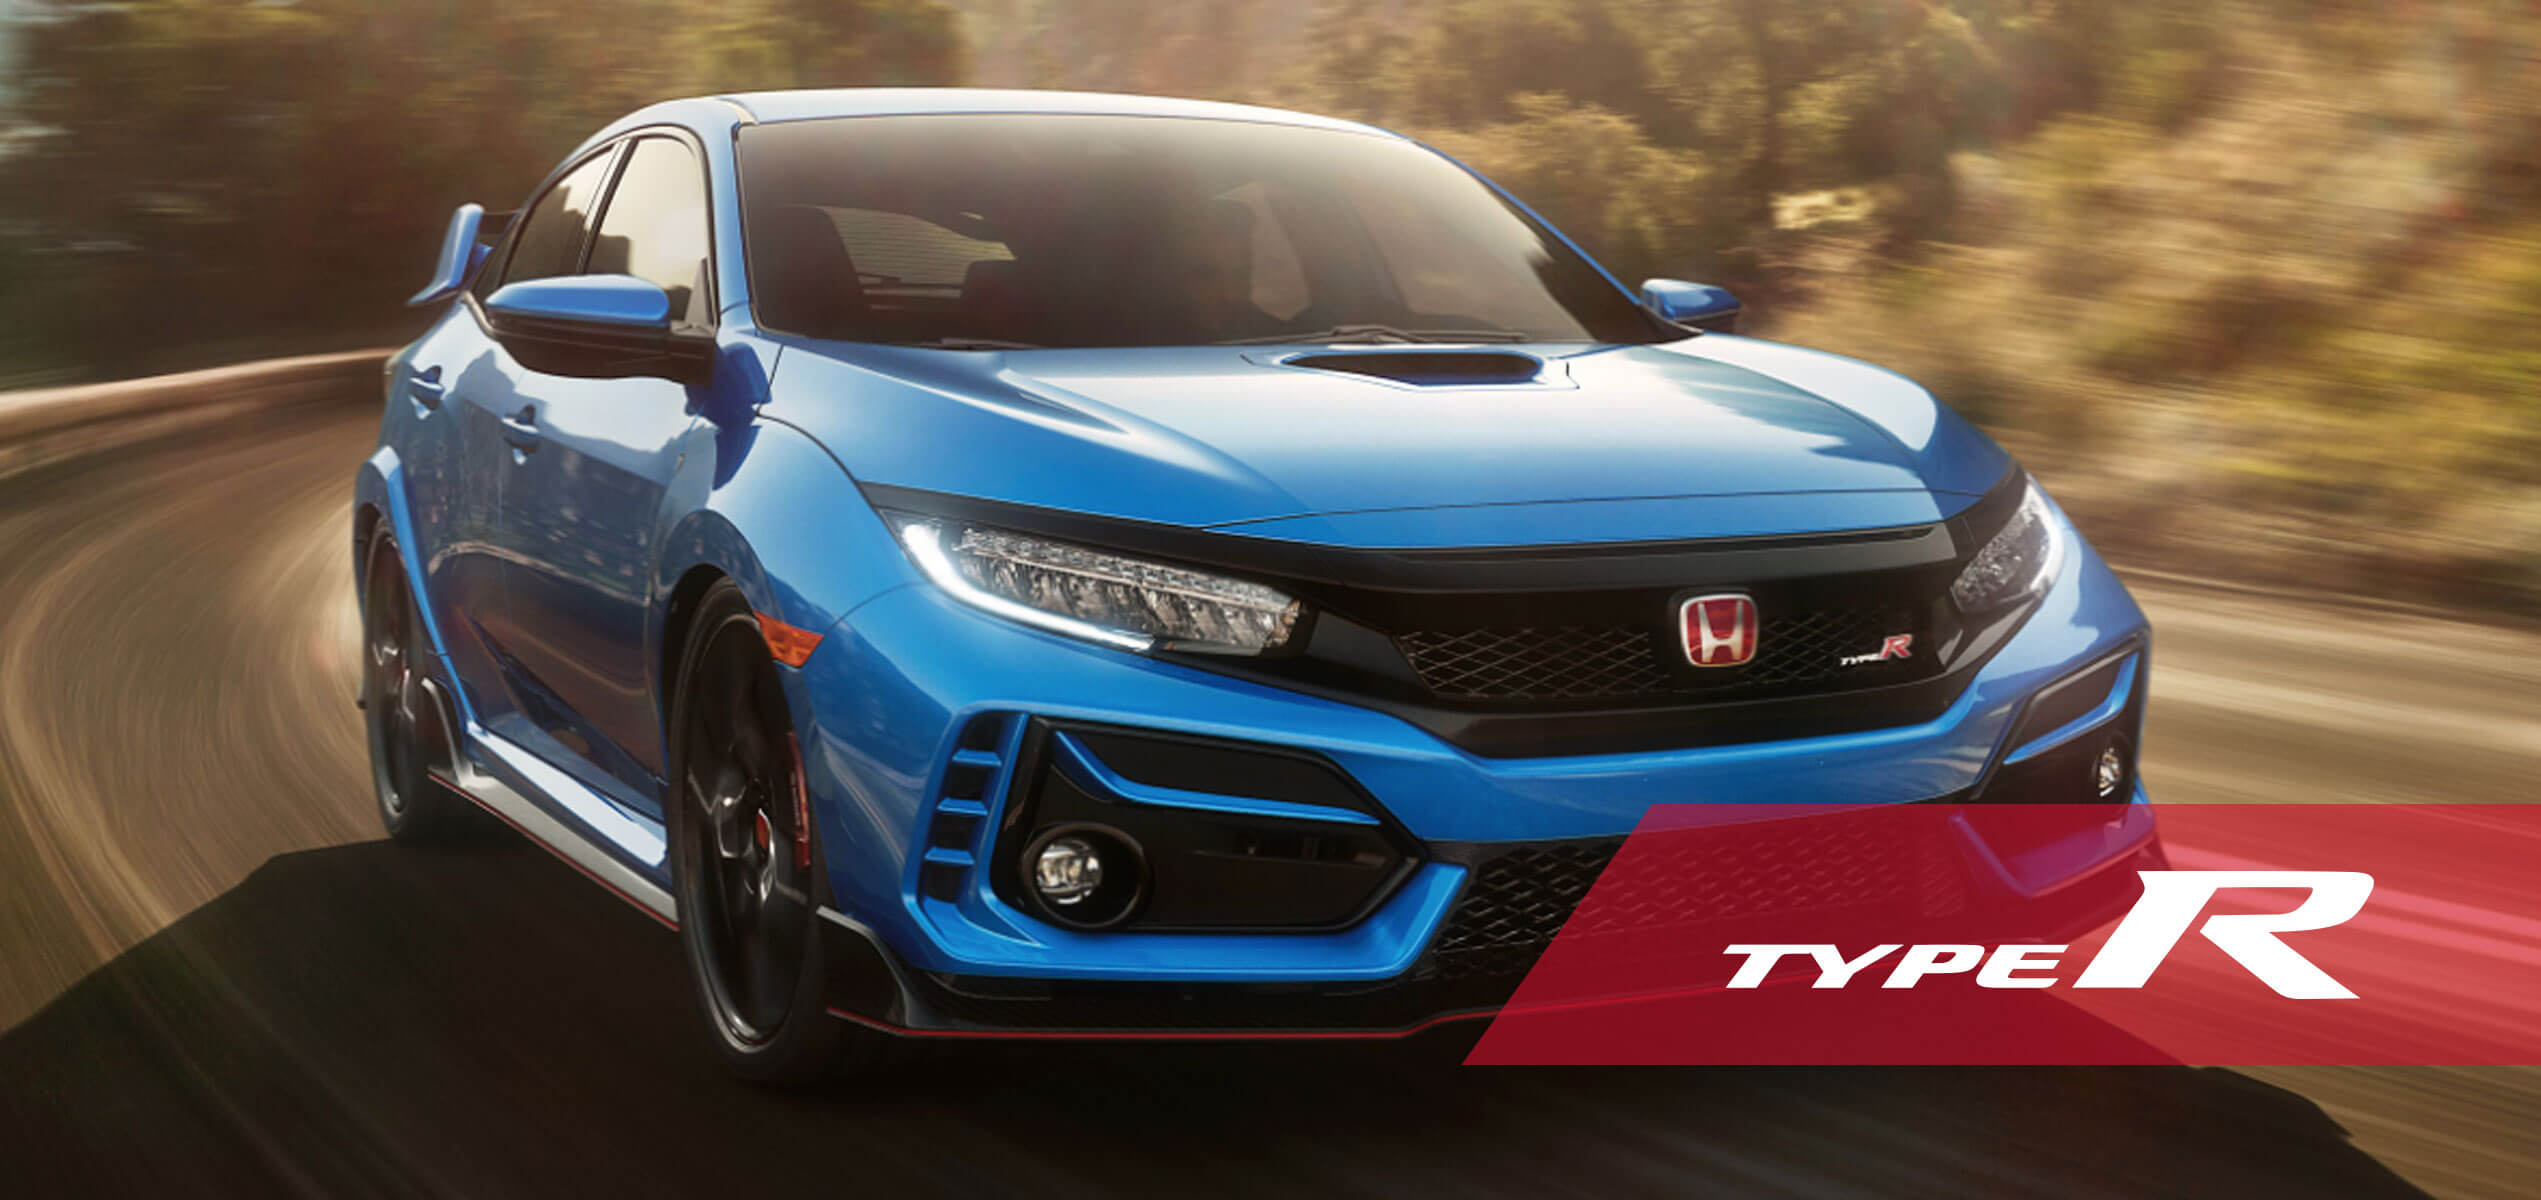 2020 Honda Civic Type R I Record Lap Time For Front Wheel Drive